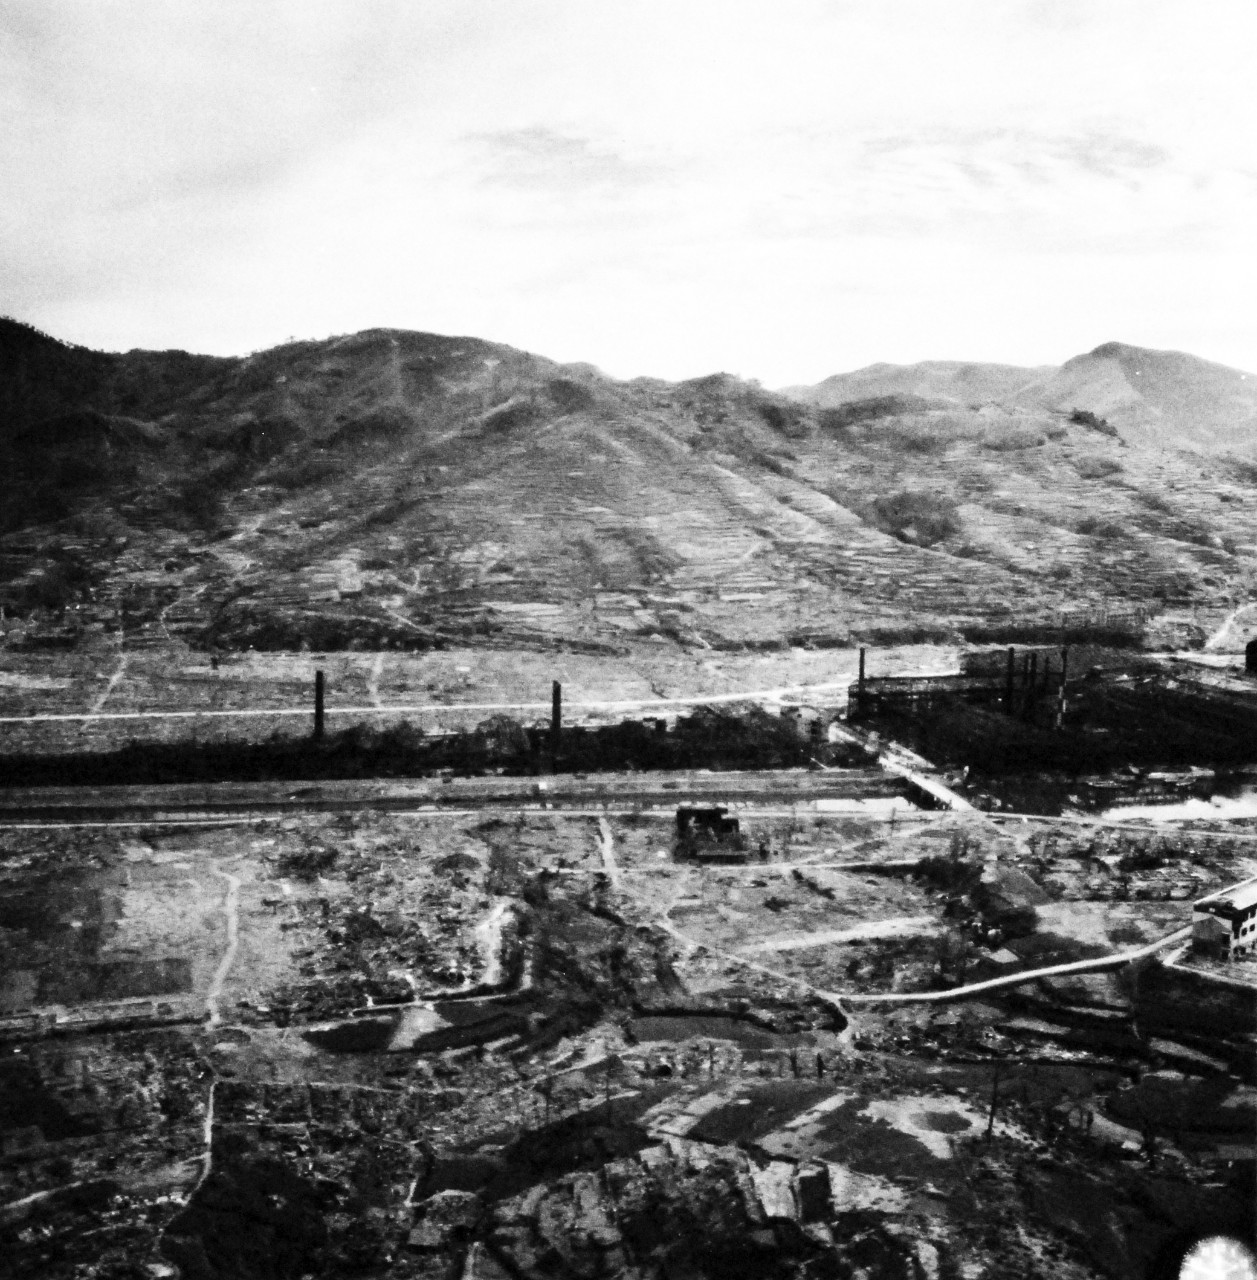 80-G-264898:   Nagasaki, Japan, 1945.  Aerial view of the bomb damage from August 9, 1945.  Altitude of 300’.  Photographed by USS Chenango (CVE-28) aircraft on October 15, 1945.  Official U.S. Navy photograph, now in the collections of the National Archives.   (2015/12/01).